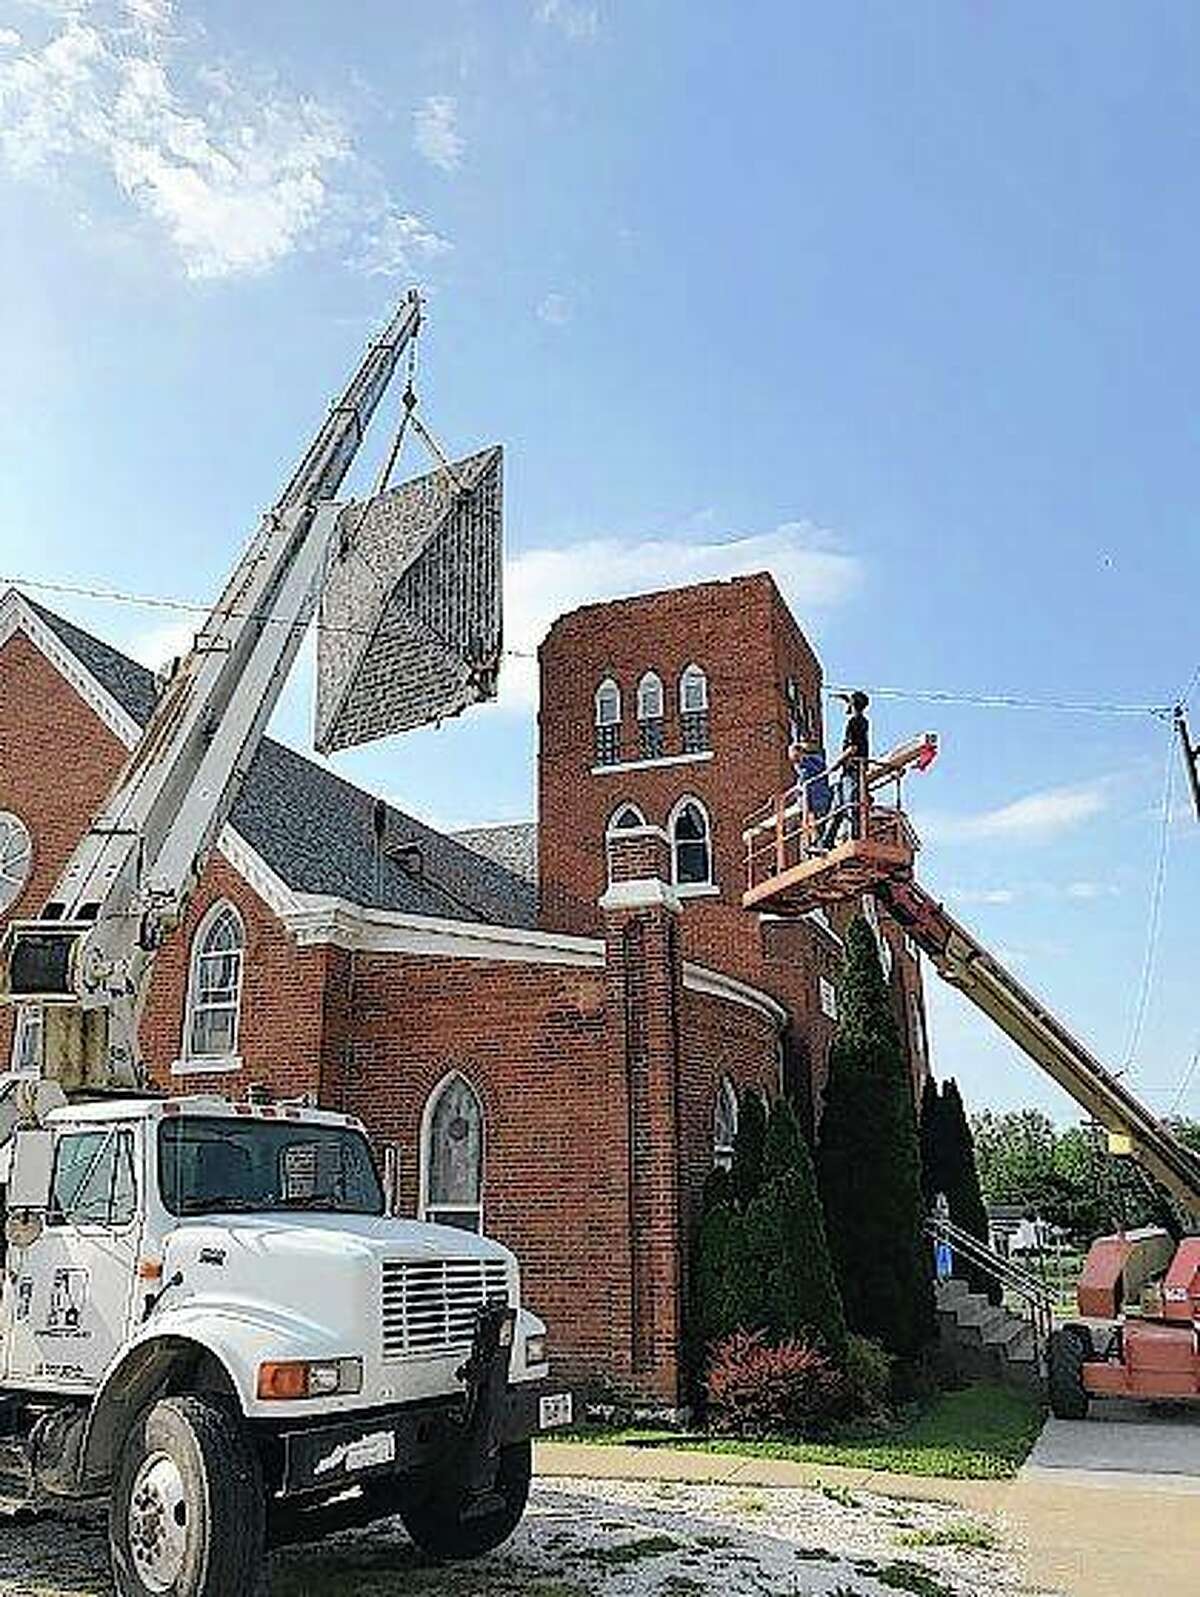 Crews work to clean up the damage at First Baptist Church in Roodhouse this week. The bell tower roof was lifted by strong winds and thrown onto the roof of the church Saturday evening.